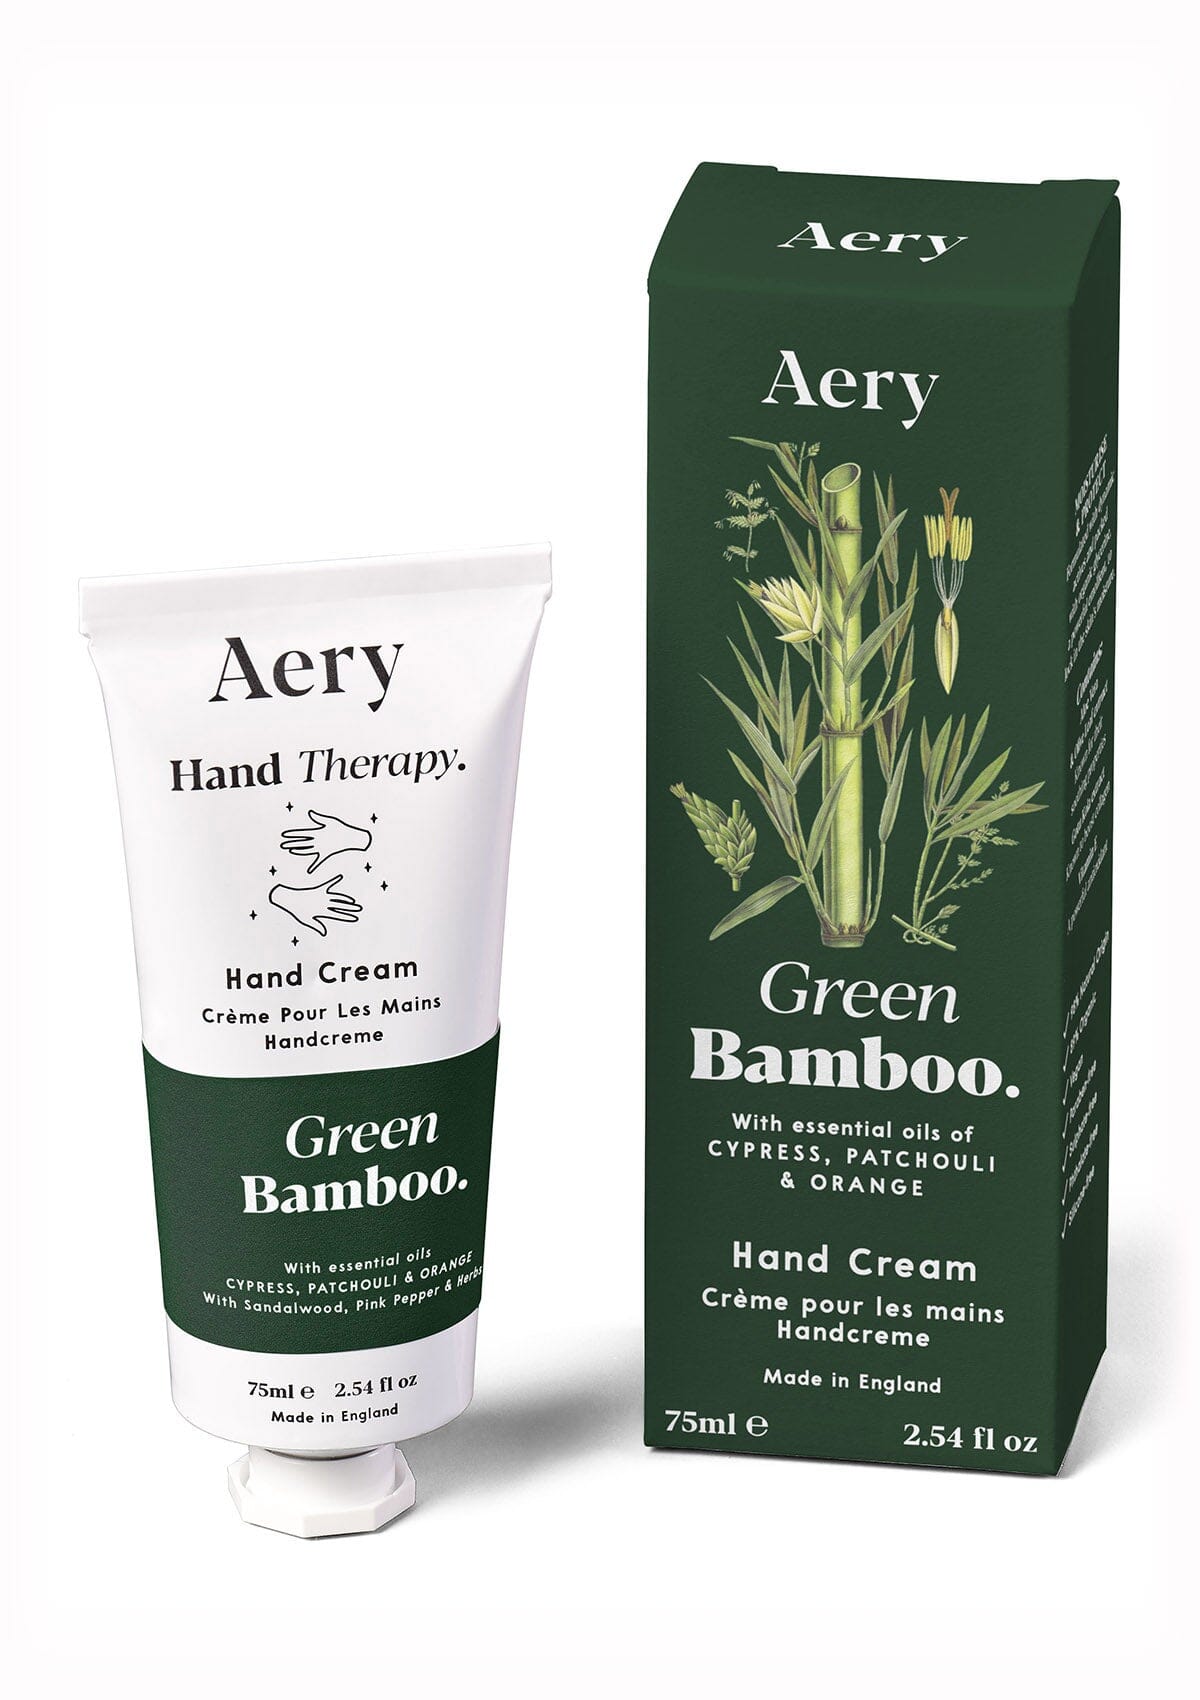 Green Bamboo hand cream displayed next to product packaging by Aery on white background 